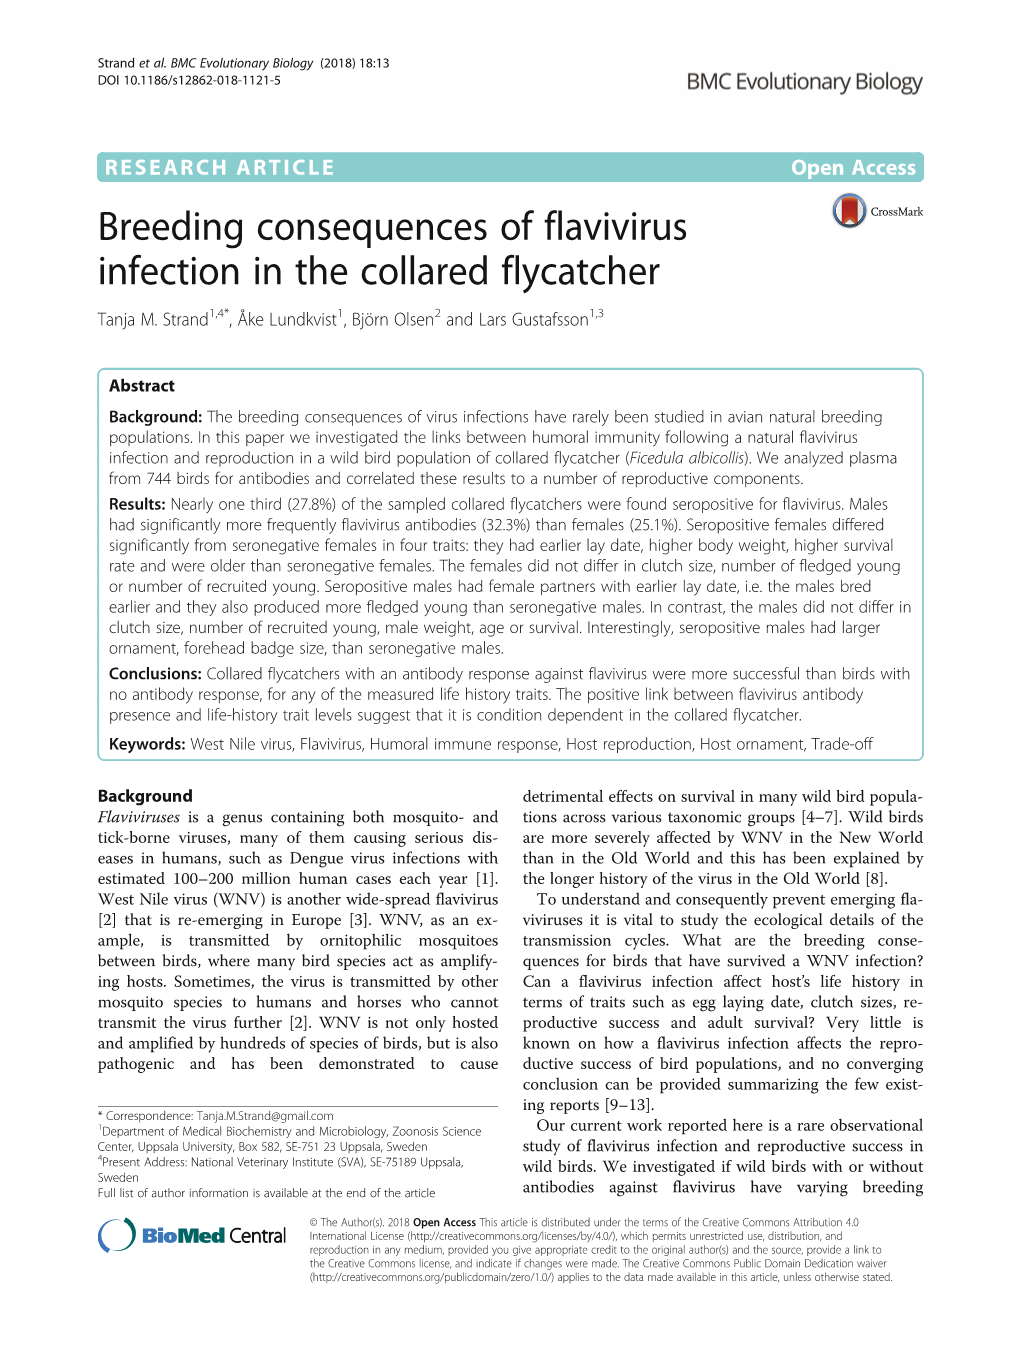 Breeding Consequences of Flavivirus Infection in the Collared Flycatcher Tanja M